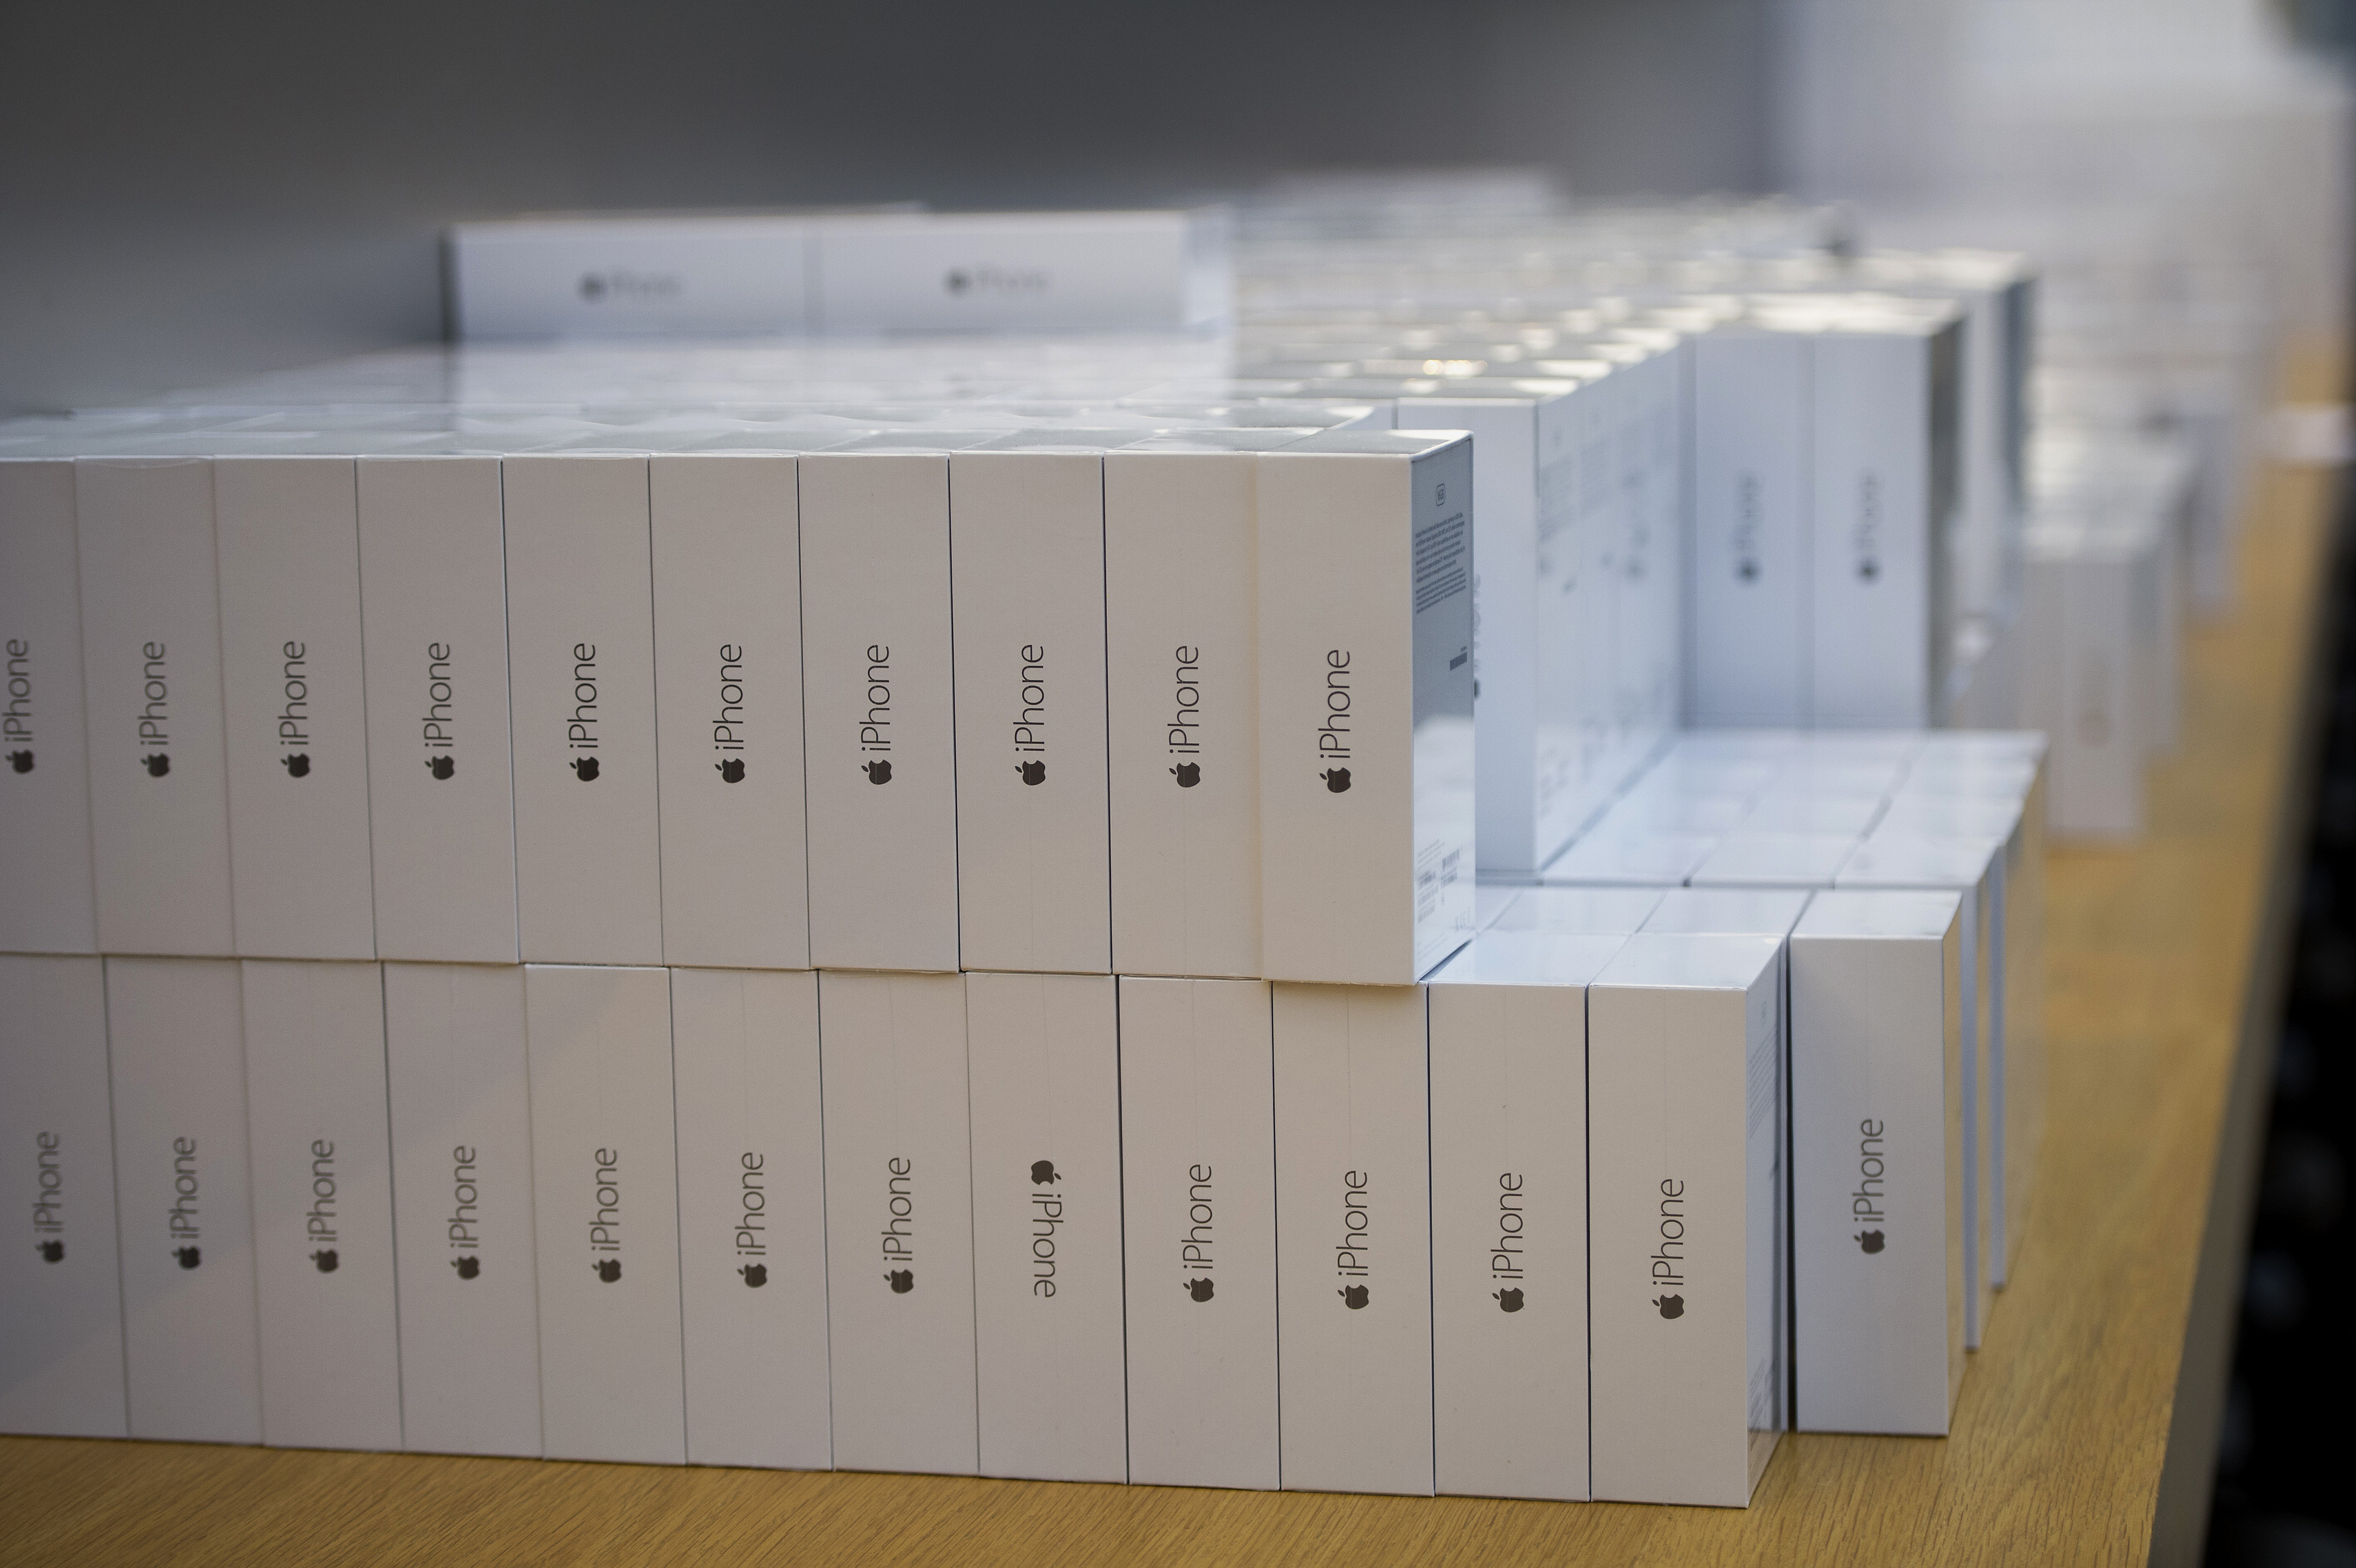 Boxes of iPhone 6 smartphones sit stacked on a counter during the sales launch at the Apple Inc. store in Palo Alto, Calif., on Sept. 19, 2014. (Bloomberg via Getty Images)